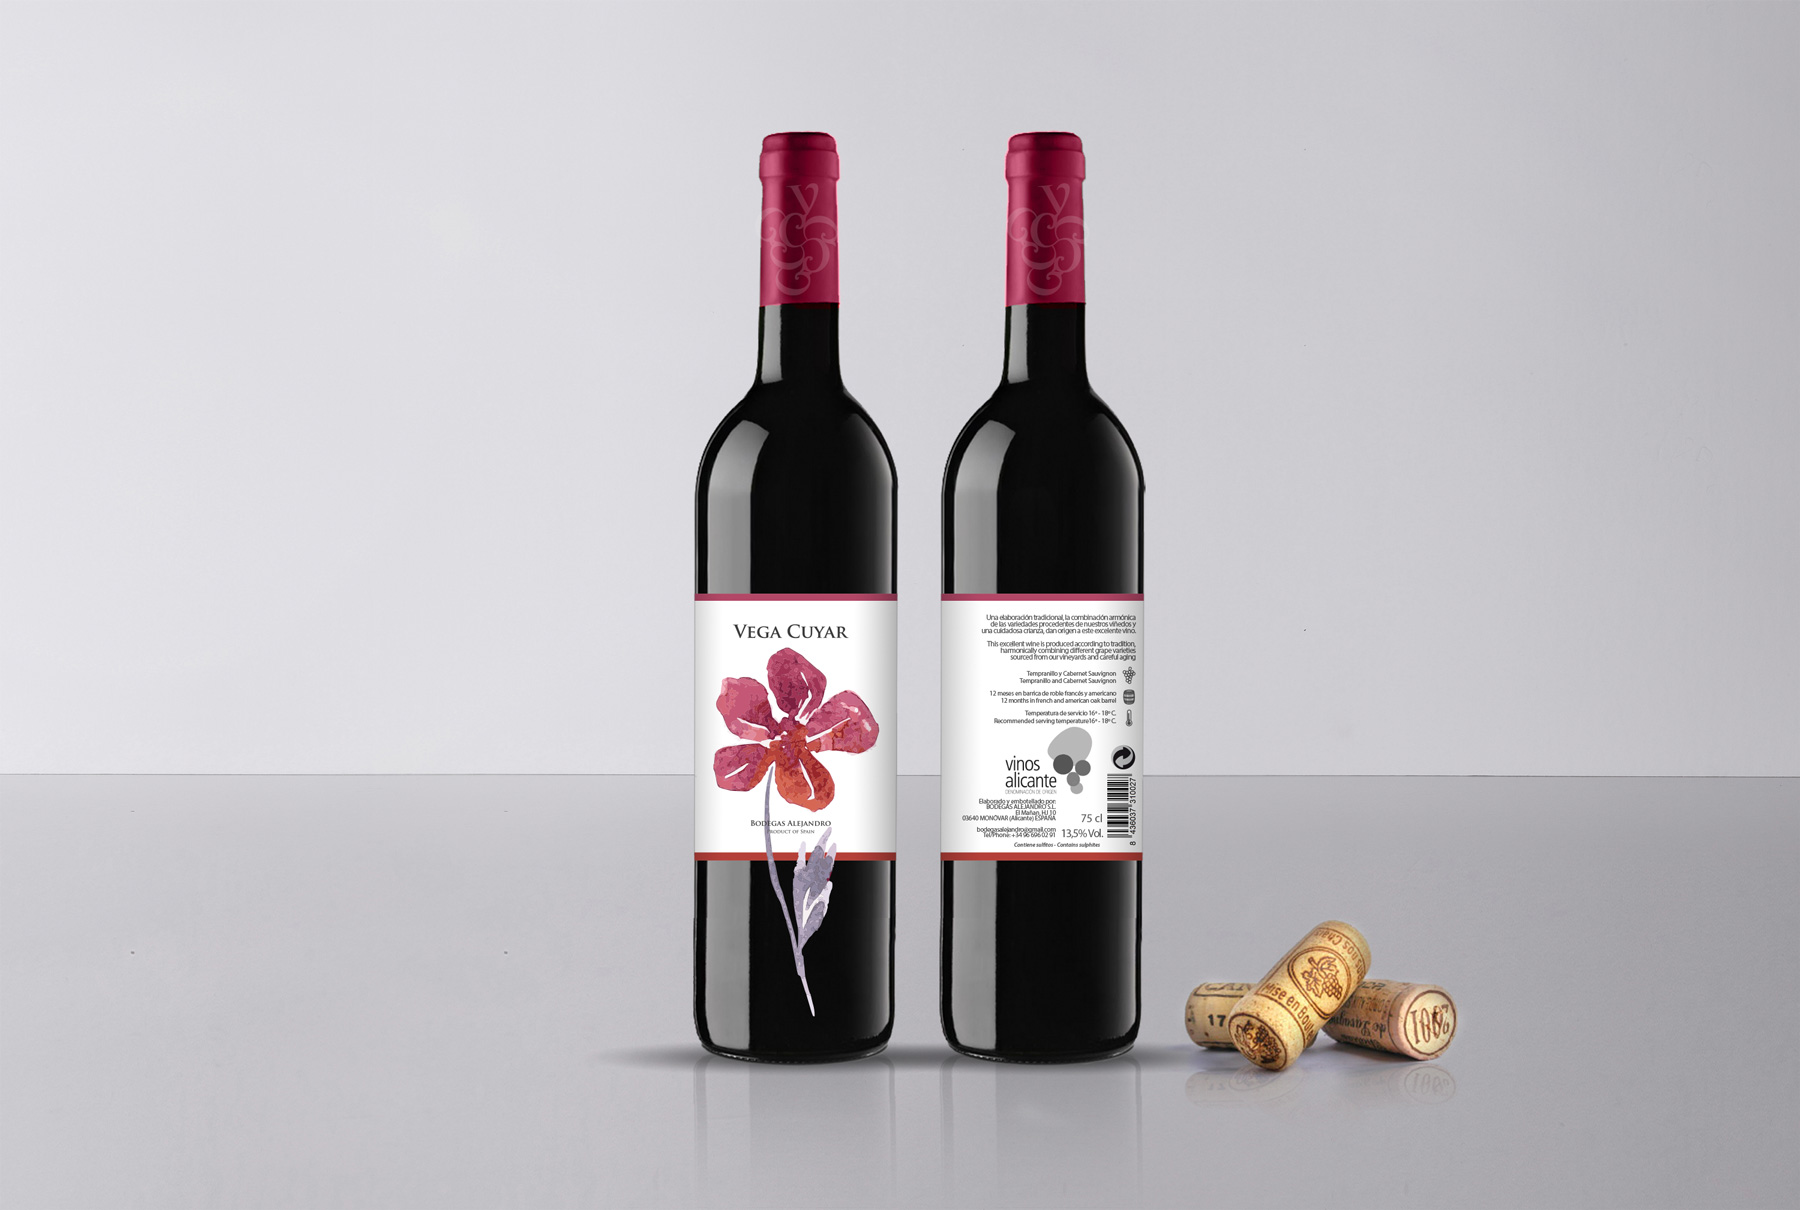 Portfolio of graphic and creative design works on wine labels and packaging for Spanish wine: VEGA CUYAR